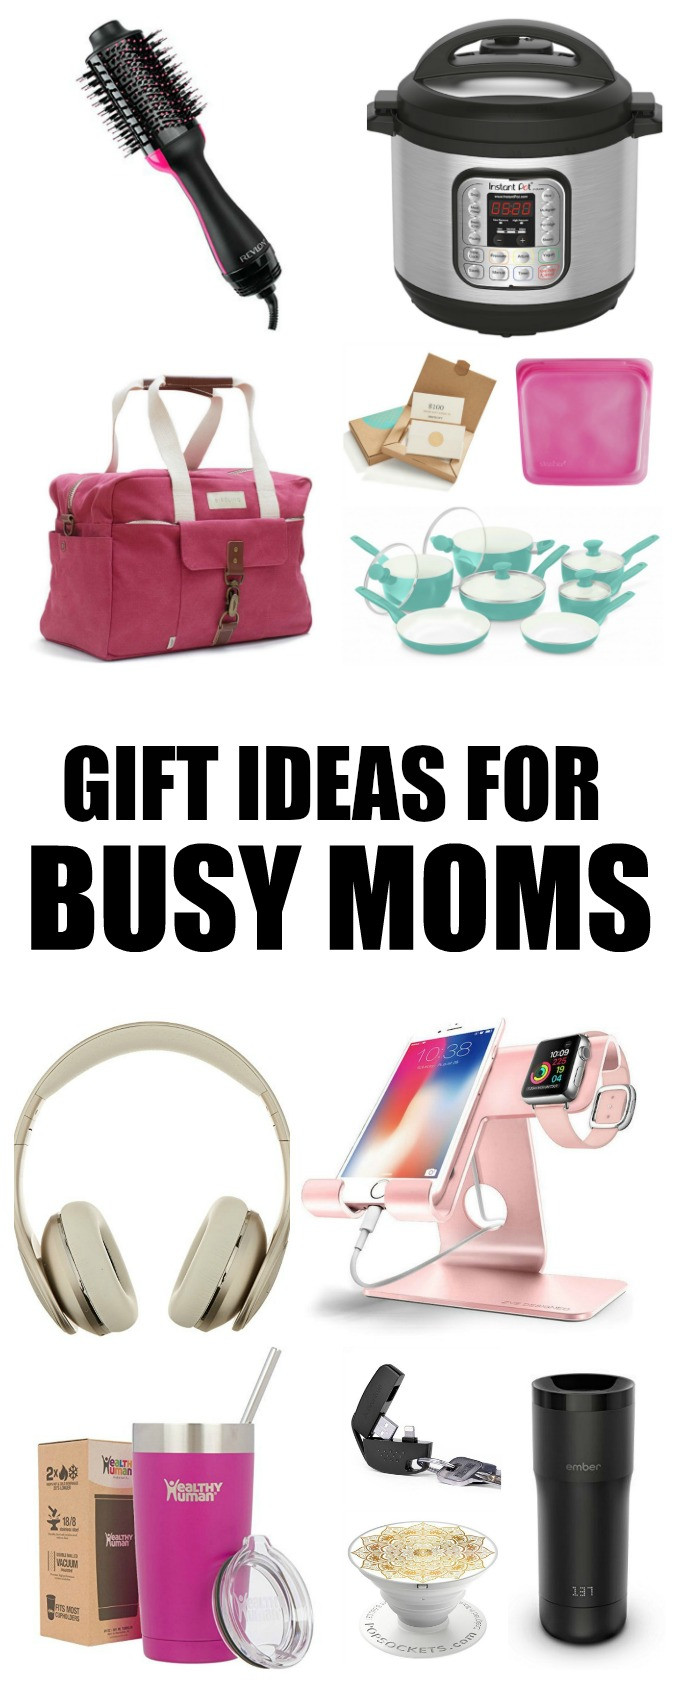 Christmas Gift Ideas For Moms
 Gift Ideas For Busy Moms